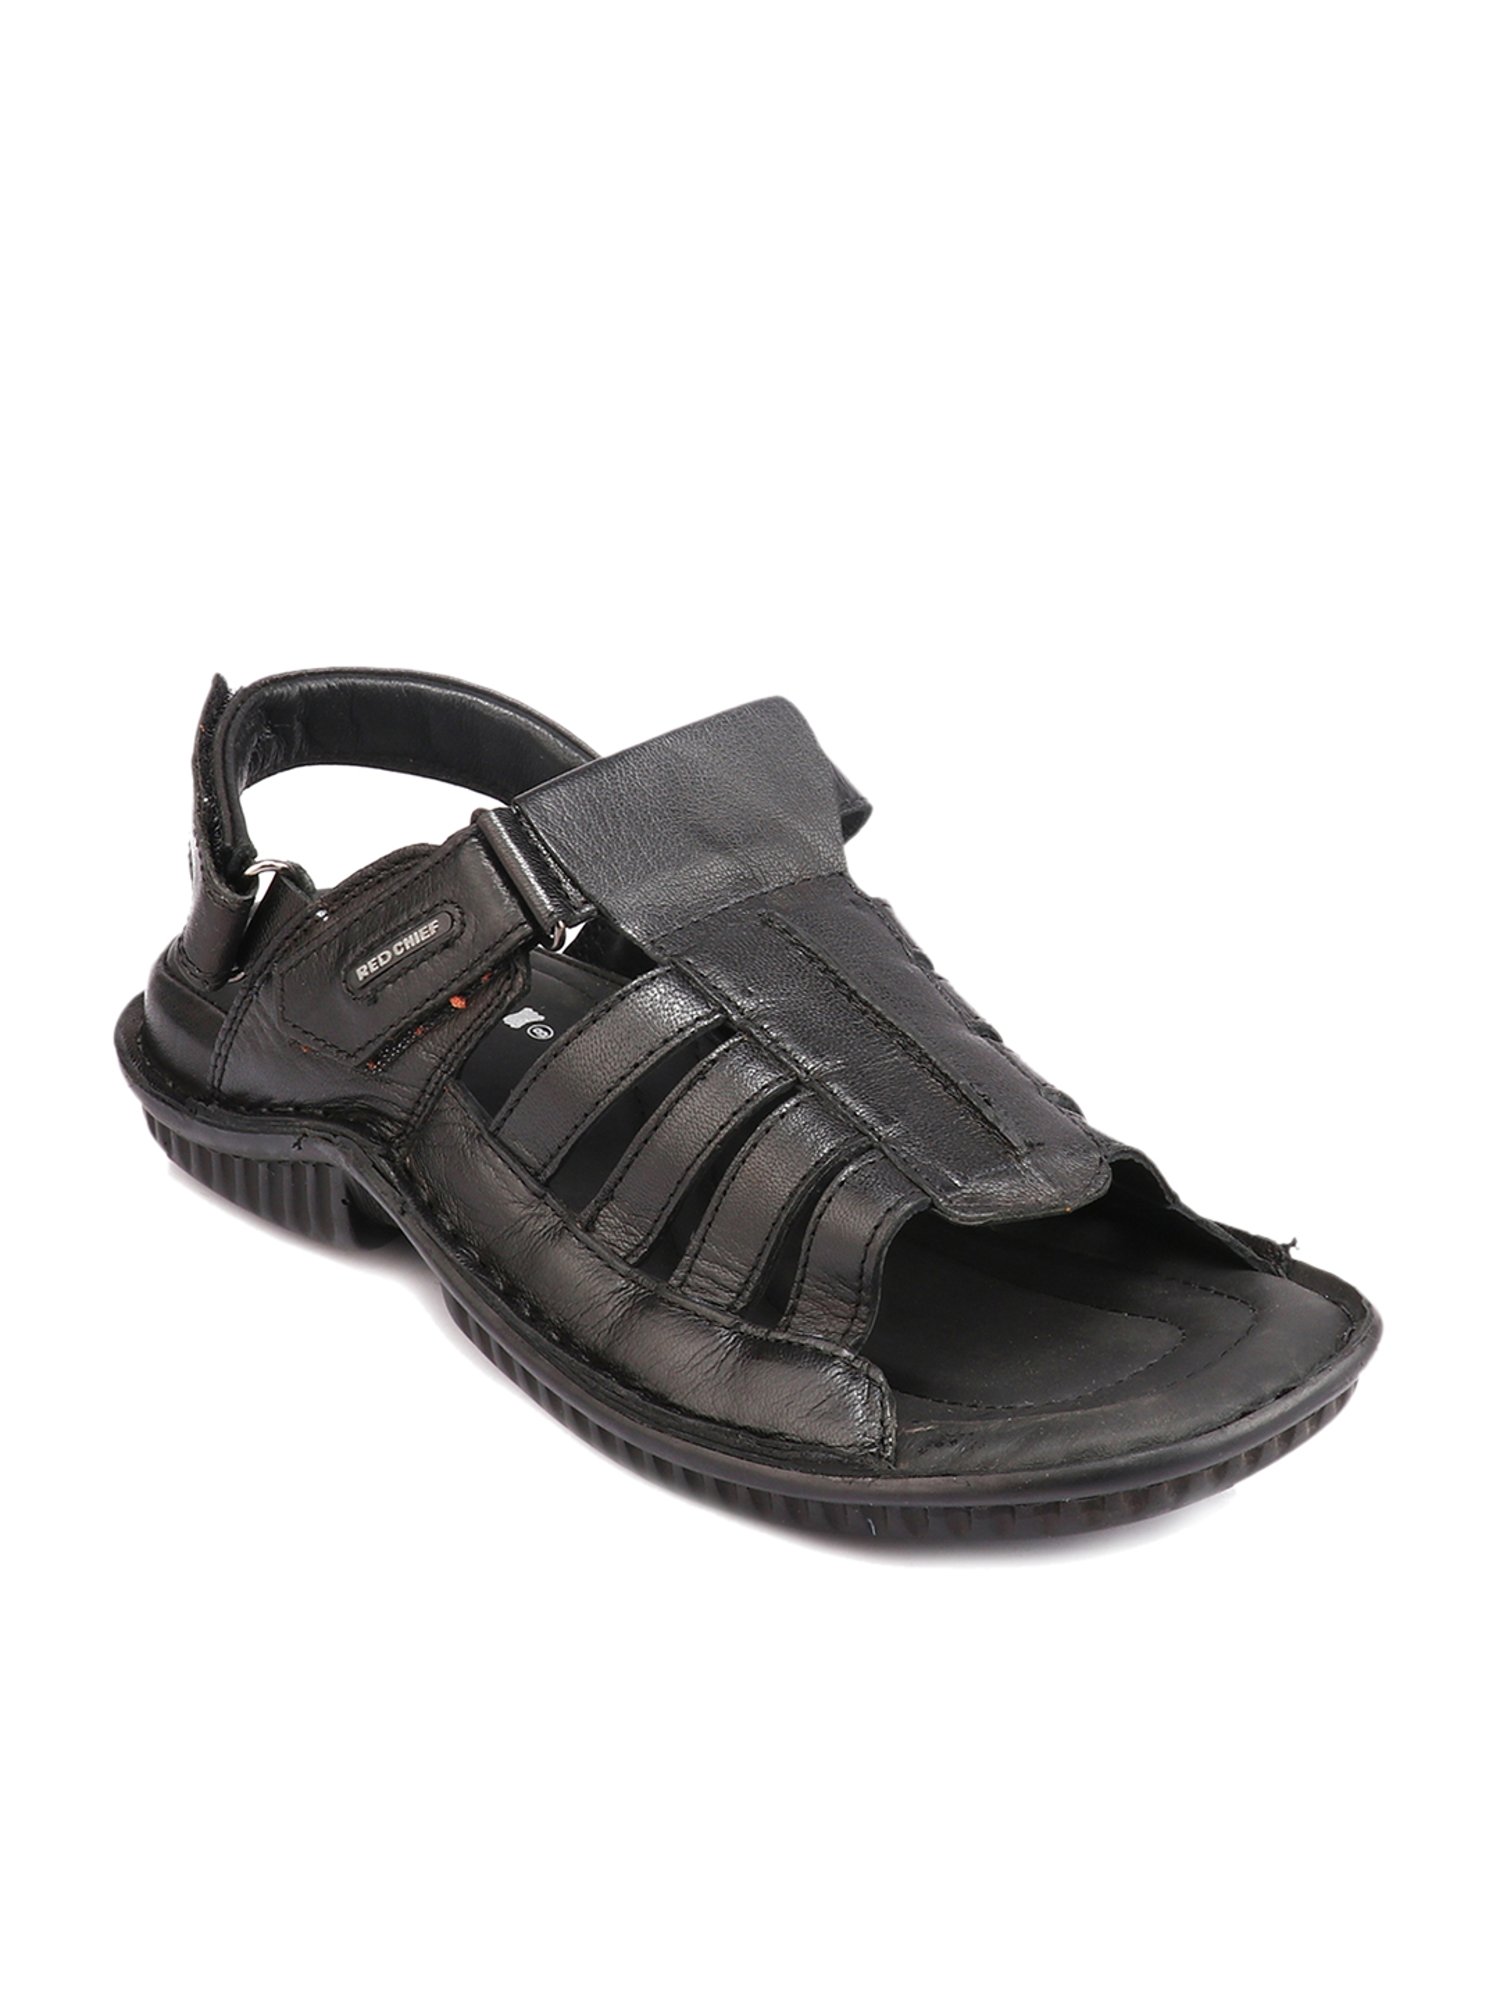 Red Chief Men's Sandal | Mens sandals, Red chief, Casual shoes